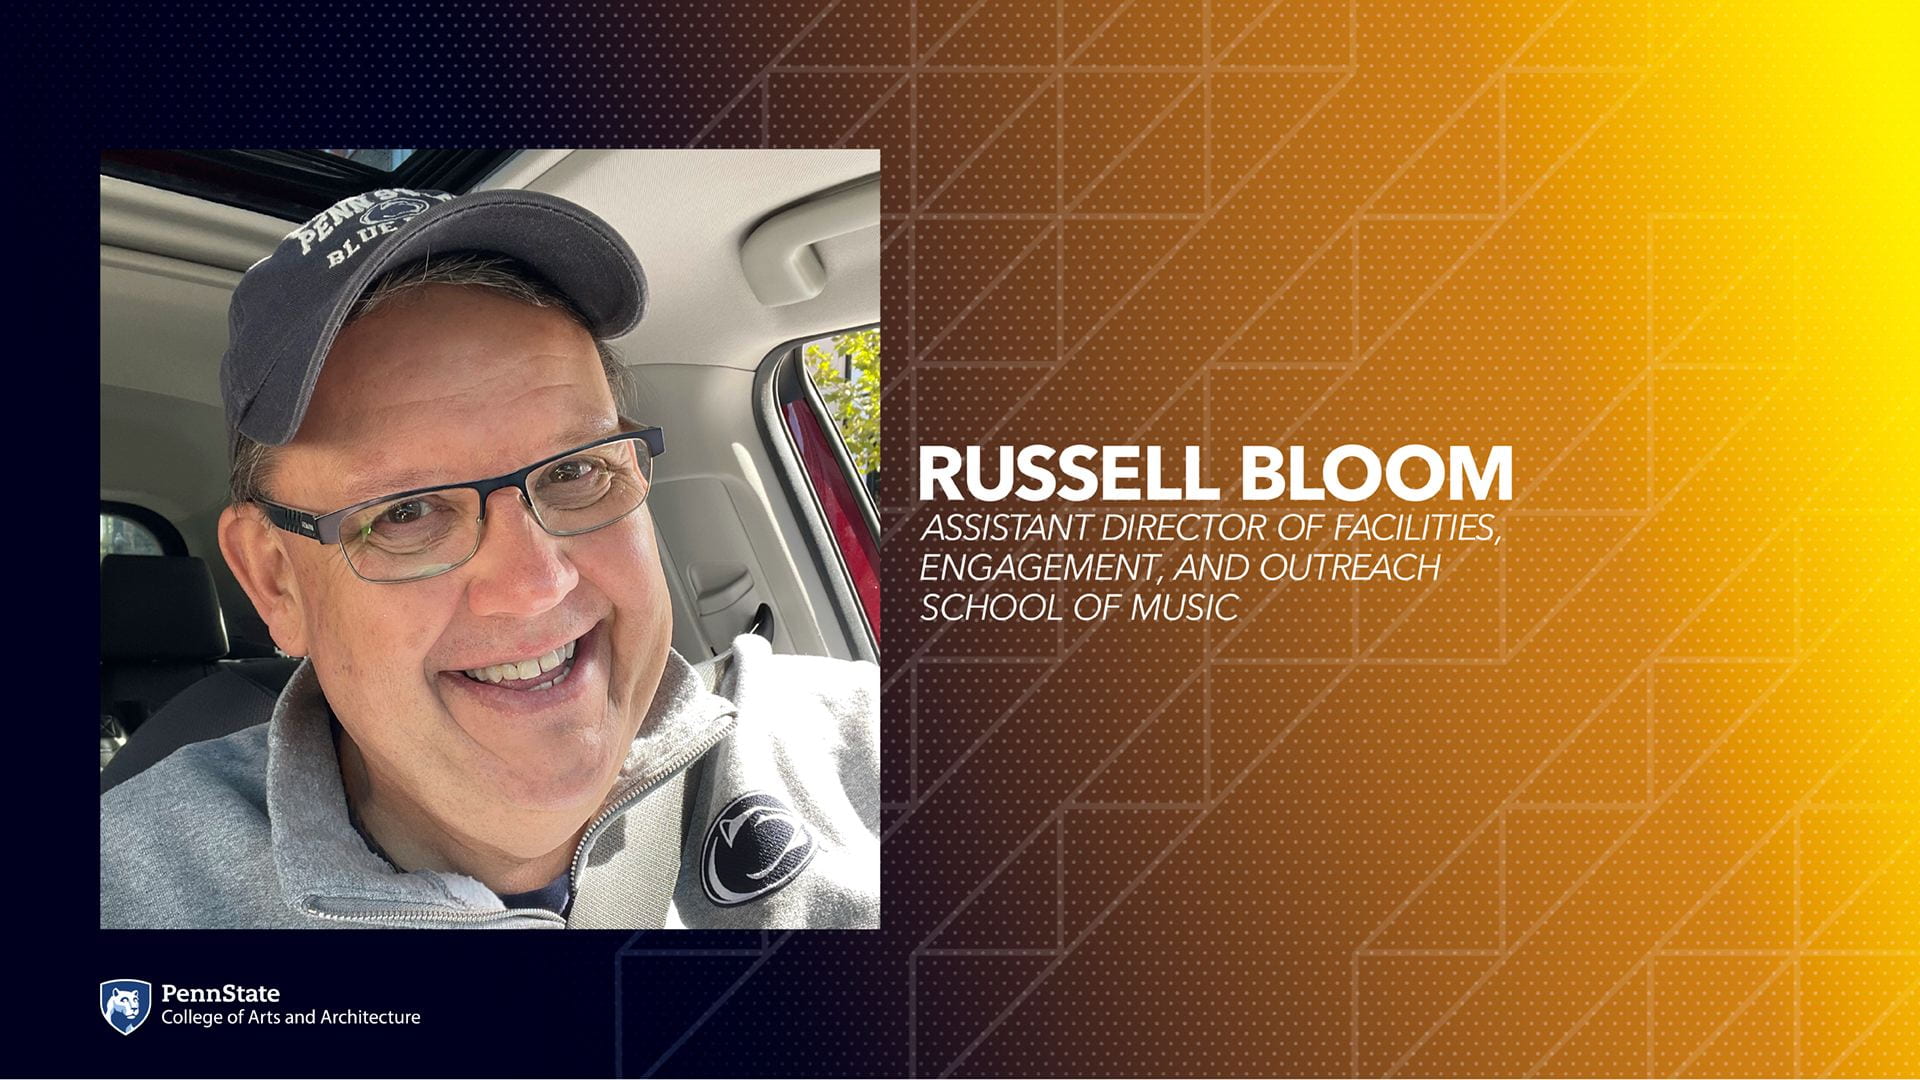 Russell Bloom's headshot with his name, title and unit.